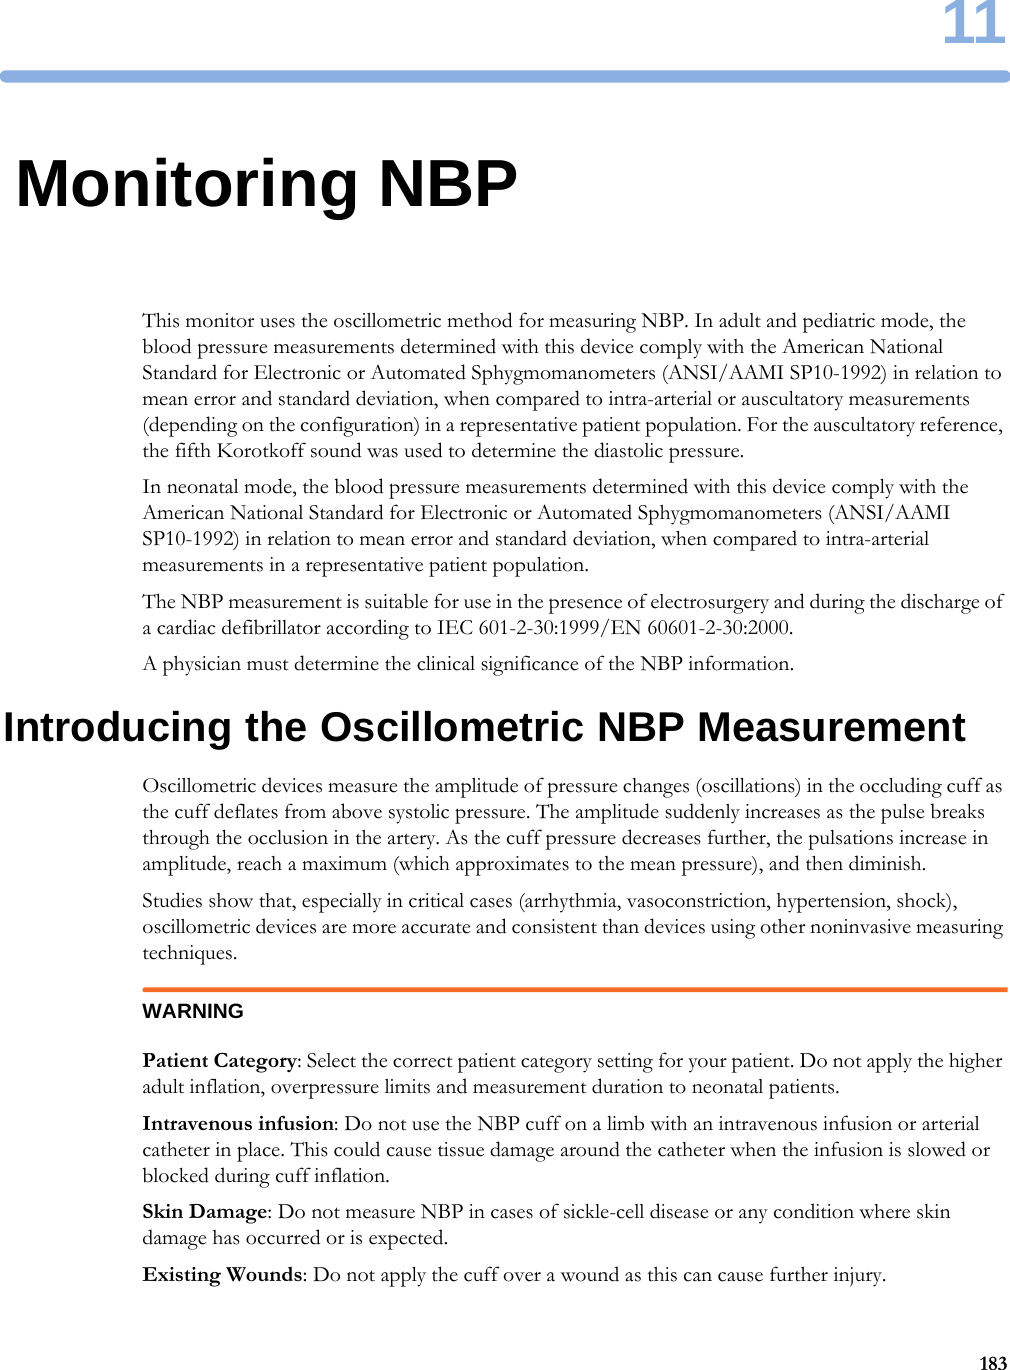 1118311Monitoring NBPThis monitor uses the oscillometric method for measuring NBP. In adult and pediatric mode, the blood pressure measurements determined with this device comply with the American National Standard for Electronic or Automated Sphygmomanometers (ANSI/AAMI SP10-1992) in relation to mean error and standard deviation, when compared to intra-arterial or auscultatory measurements (depending on the configuration) in a representative patient population. For the auscultatory reference, the fifth Korotkoff sound was used to determine the diastolic pressure.In neonatal mode, the blood pressure measurements determined with this device comply with the American National Standard for Electronic or Automated Sphygmomanometers (ANSI/AAMI SP10-1992) in relation to mean error and standard deviation, when compared to intra-arterial measurements in a representative patient population.The NBP measurement is suitable for use in the presence of electrosurgery and during the discharge of a cardiac defibrillator according to IEC 601-2-30:1999/EN 60601-2-30:2000.A physician must determine the clinical significance of the NBP information.Introducing the Oscillometric NBP MeasurementOscillometric devices measure the amplitude of pressure changes (oscillations) in the occluding cuff as the cuff deflates from above systolic pressure. The amplitude suddenly increases as the pulse breaks through the occlusion in the artery. As the cuff pressure decreases further, the pulsations increase in amplitude, reach a maximum (which approximates to the mean pressure), and then diminish.Studies show that, especially in critical cases (arrhythmia, vasoconstriction, hypertension, shock), oscillometric devices are more accurate and consistent than devices using other noninvasive measuring techniques.WARNINGPatient Category: Select the correct patient category setting for your patient. Do not apply the higher adult inflation, overpressure limits and measurement duration to neonatal patients.Intravenous infusion: Do not use the NBP cuff on a limb with an intravenous infusion or arterial catheter in place. This could cause tissue damage around the catheter when the infusion is slowed or blocked during cuff inflation.Skin Damage: Do not measure NBP in cases of sickle-cell disease or any condition where skin damage has occurred or is expected.Existing Wounds: Do not apply the cuff over a wound as this can cause further injury.